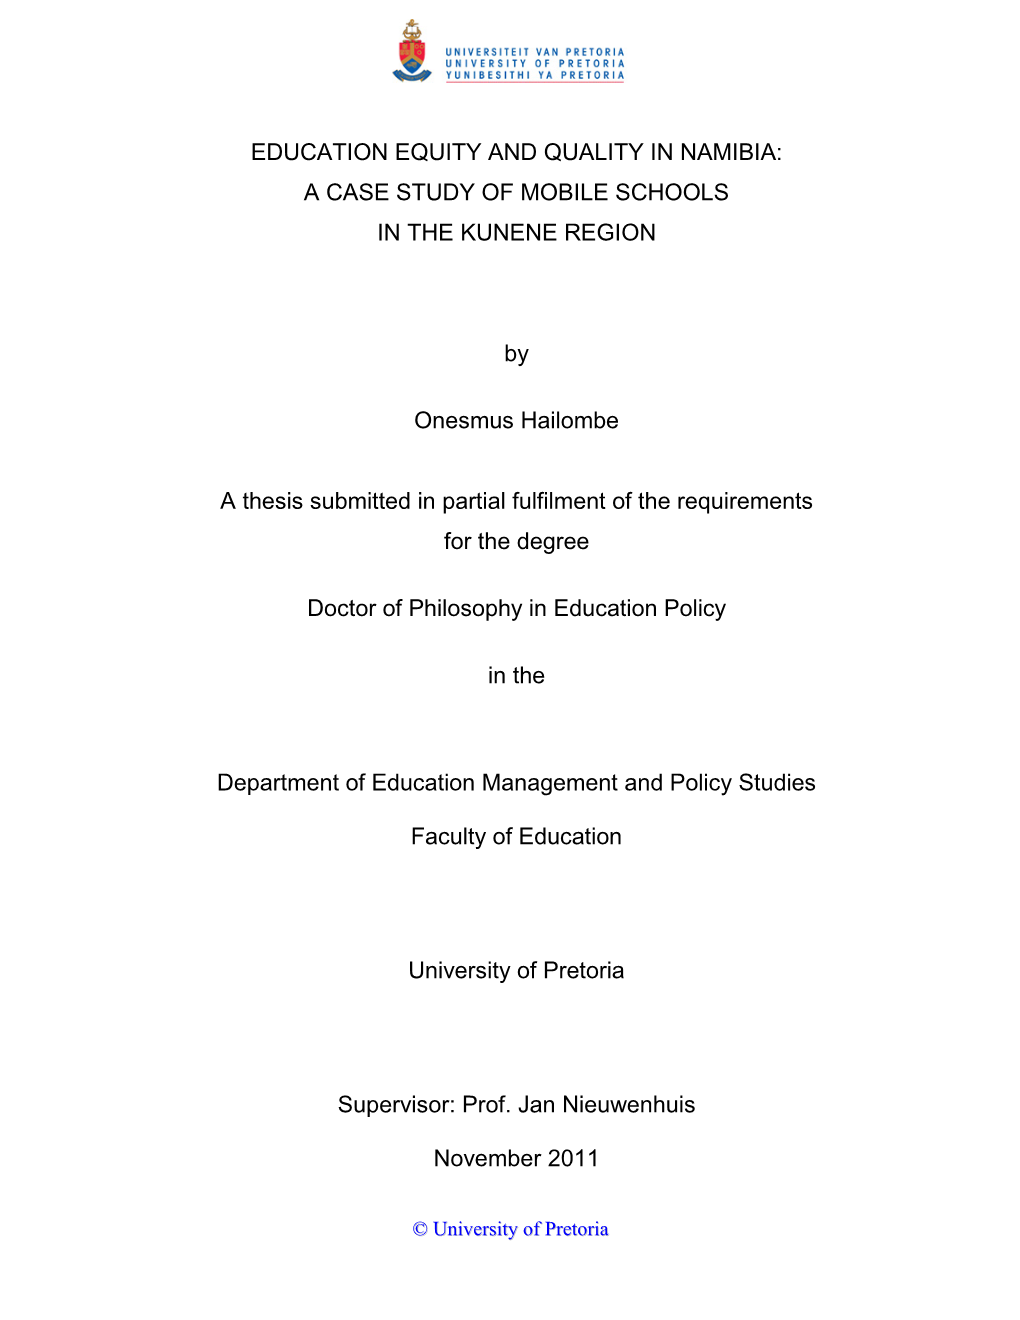 Education Equity and Quality in Namibia: a Case Study of Mobile Schools in the Kunene Region